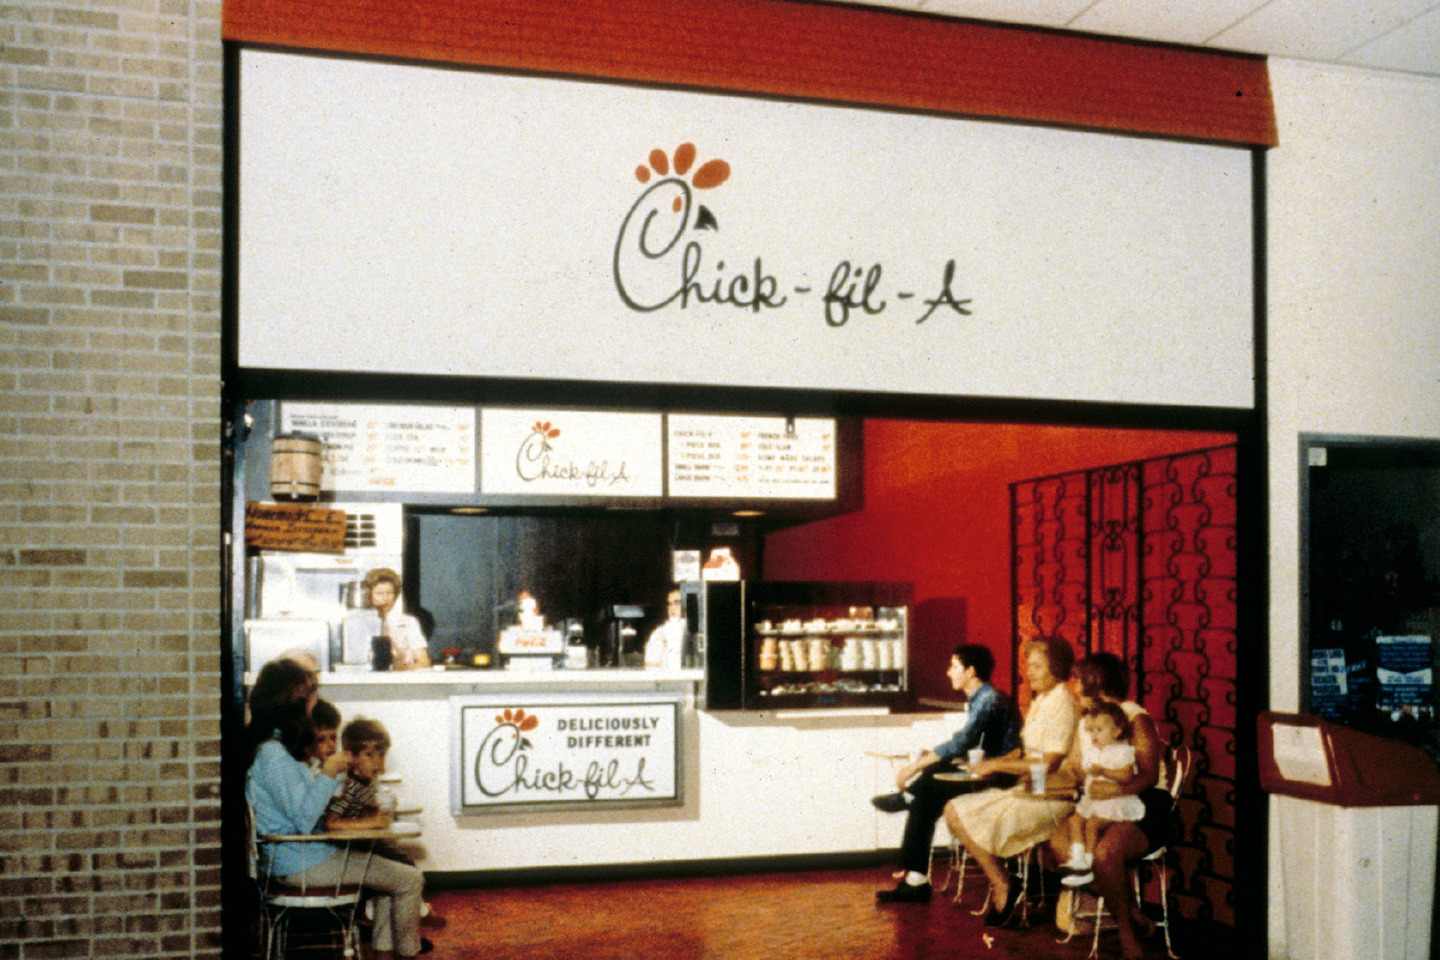 first chick-fil-a restaurant opened in 1967